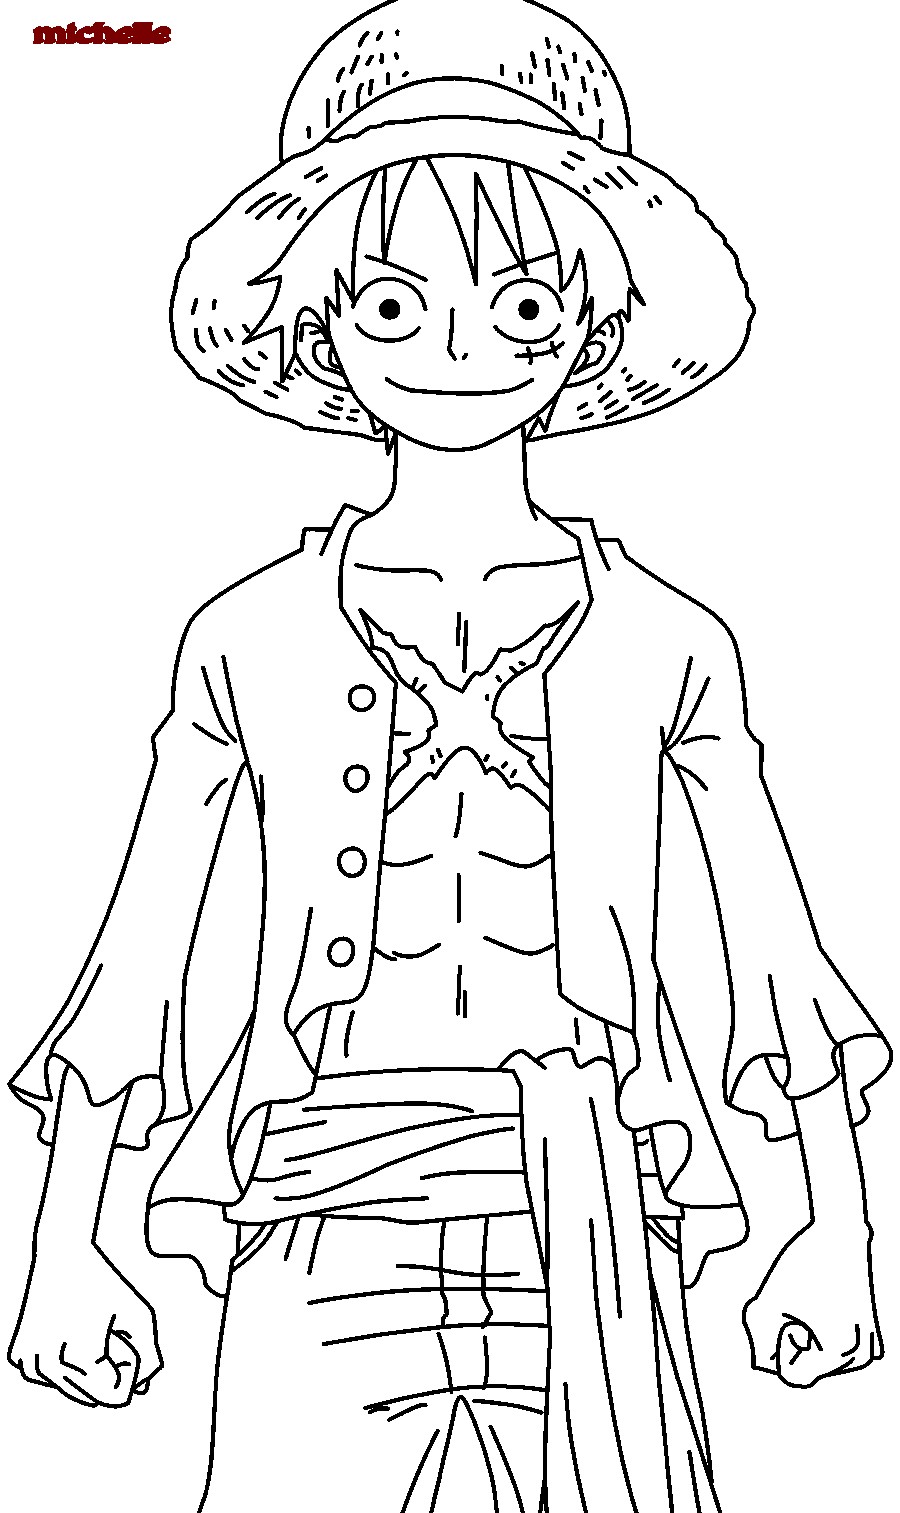 One Piece Luffy After 2 Years Coloring Page Free Printable Coloring Pages For Kids